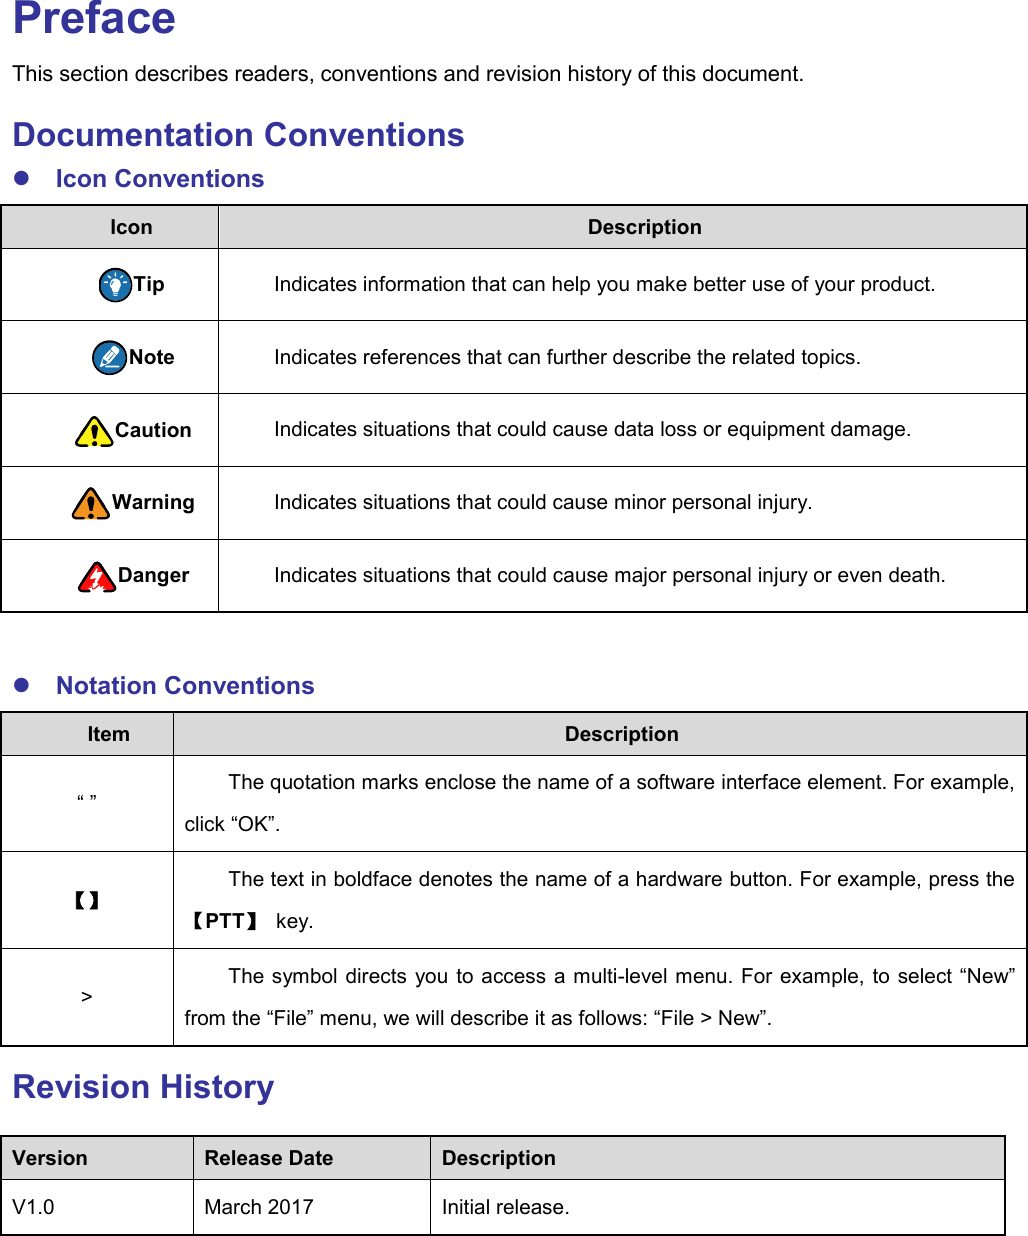   Preface This section describes readers, conventions and revision history of this document.   Documentation Conventions  Icon Conventions Icon Description Tip Indicates information that can help you make better use of your product. Note   Indicates references that can further describe the related topics.   Caution Indicates situations that could cause data loss or equipment damage. Warning Indicates situations that could cause minor personal injury. Danger Indicates situations that could cause major personal injury or even death.   Notation Conventions Item Description “ ” The quotation marks enclose the name of a software interface element. For example, click “OK”. 【】 The text in boldface denotes the name of a hardware button. For example, press the 【PTT】  key.   &gt; The symbol directs  you to access a multi-level menu. For example, to select “New” from the “File” menu, we will describe it as follows: “File &gt; New”. Revision History Version Release Date Description V1.0 March 2017 Initial release. 